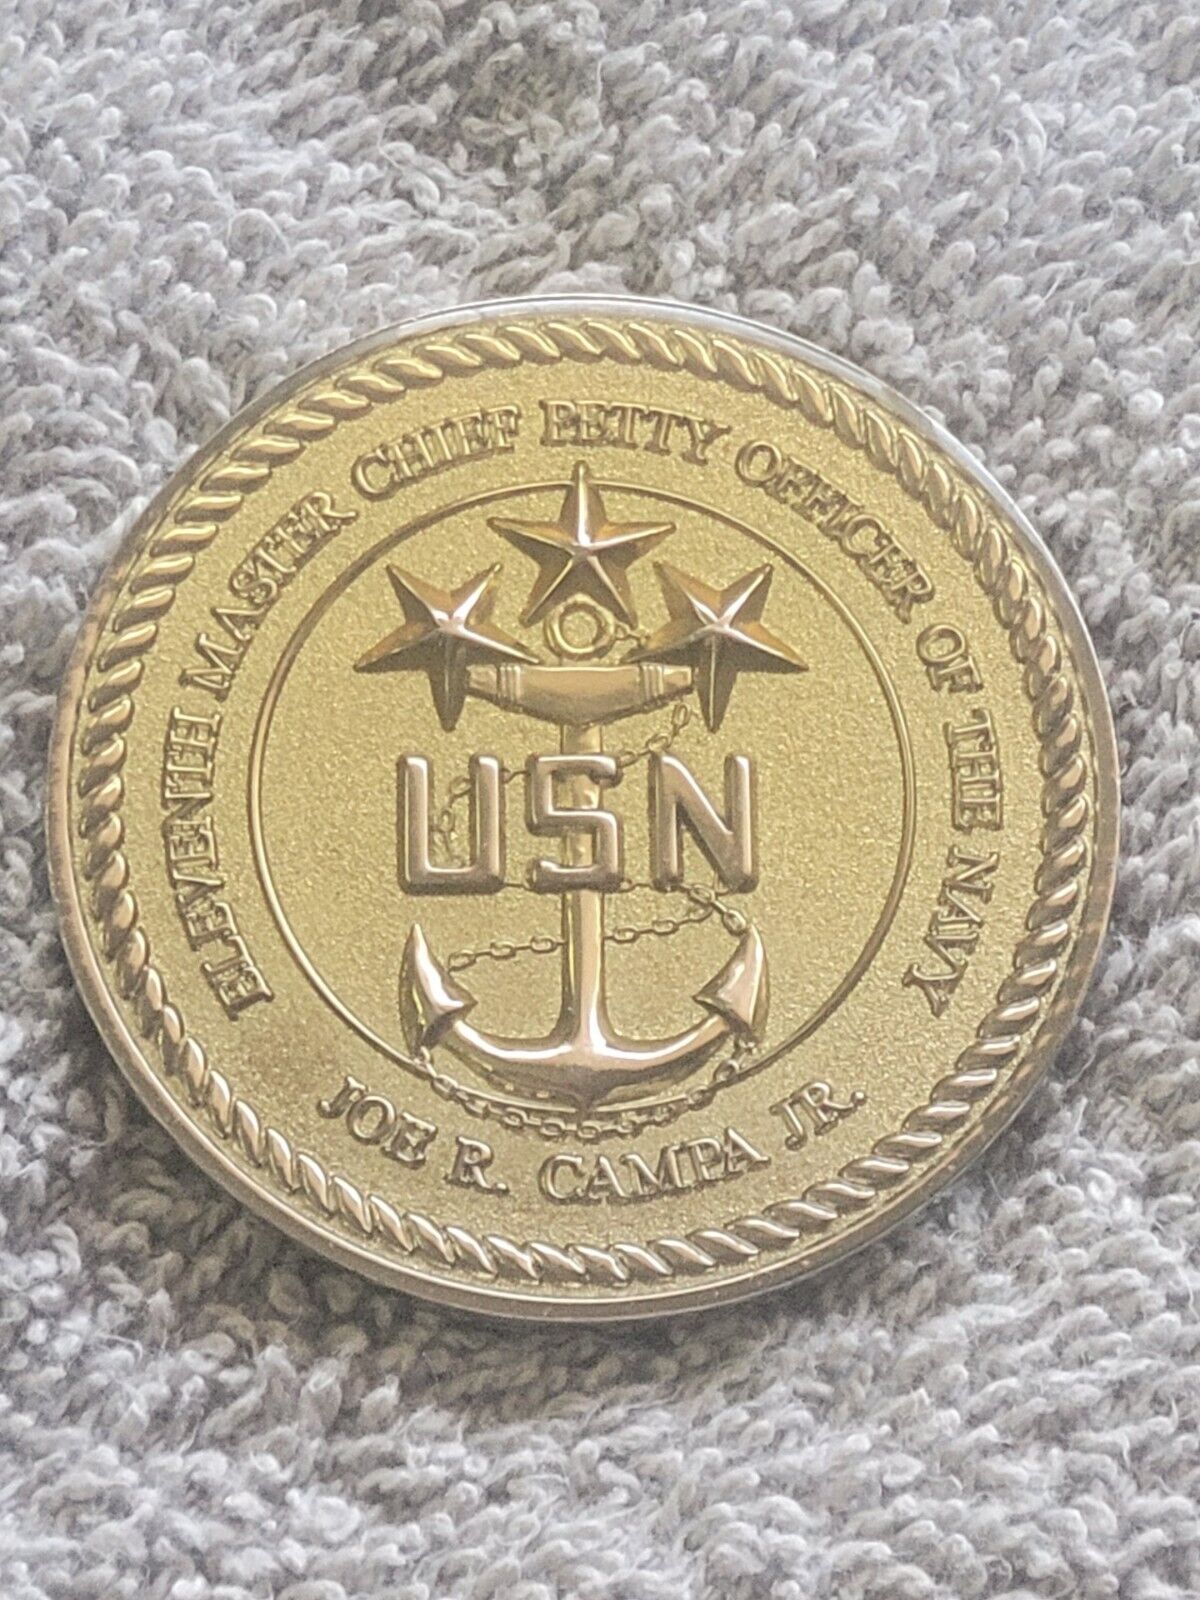 11th Master Chief Petty Officer of the Navy Joe M Campa, JR MCPON Challenge Coin